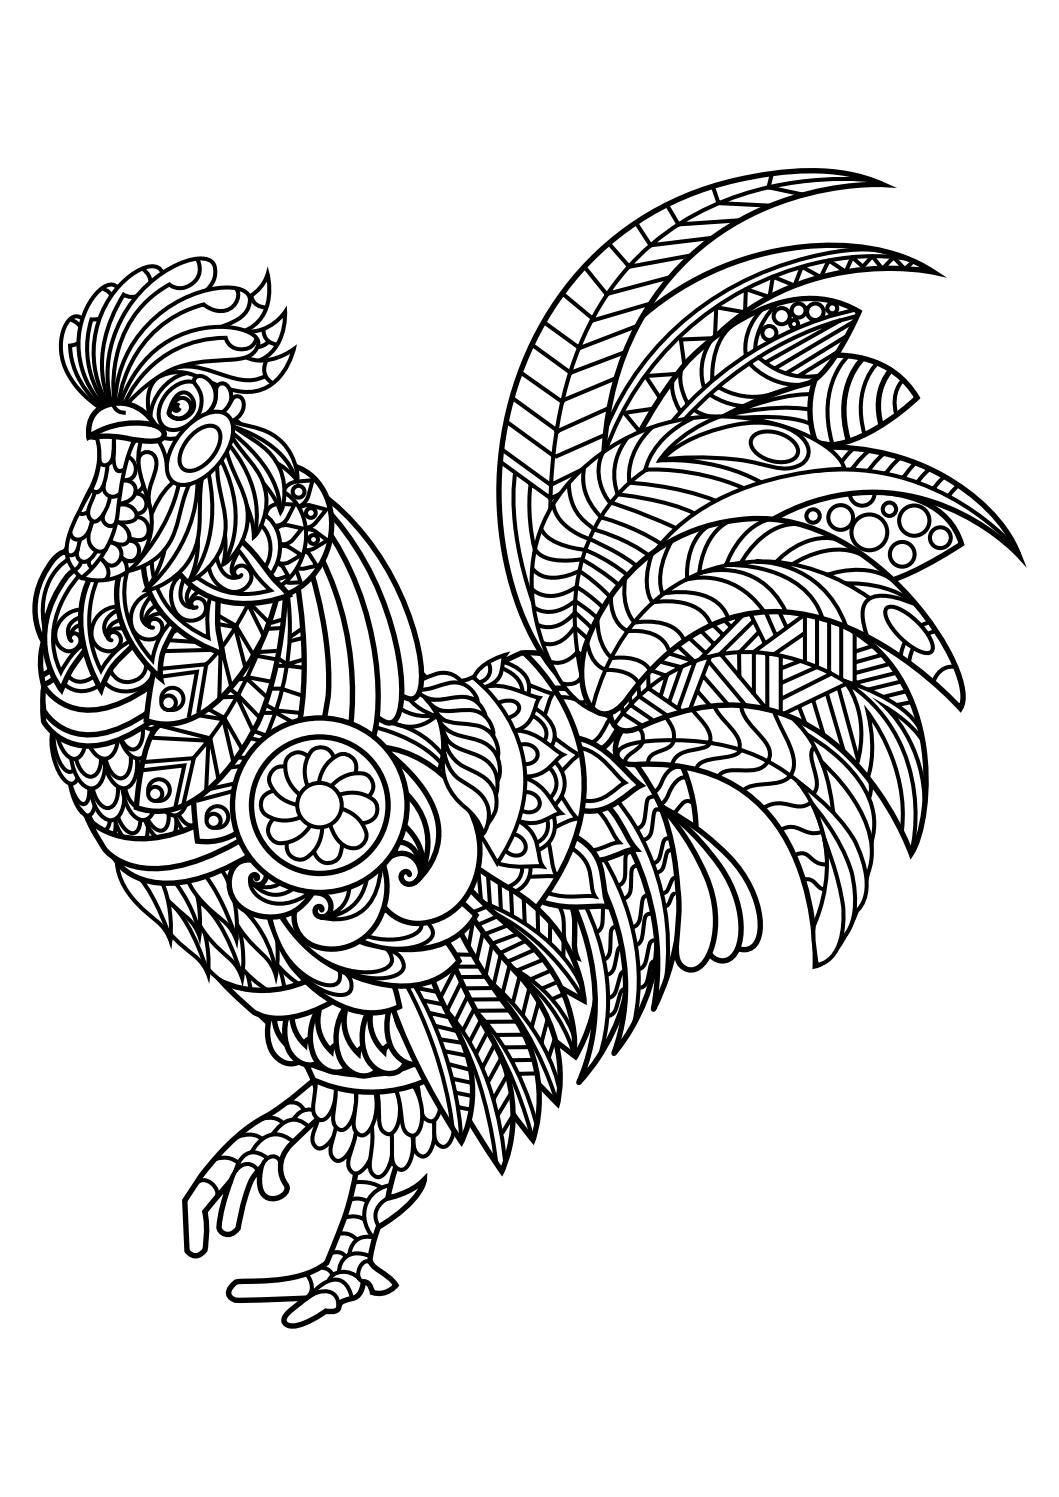 Animal Coloring Pages For Adults
 Animal coloring pages pdf